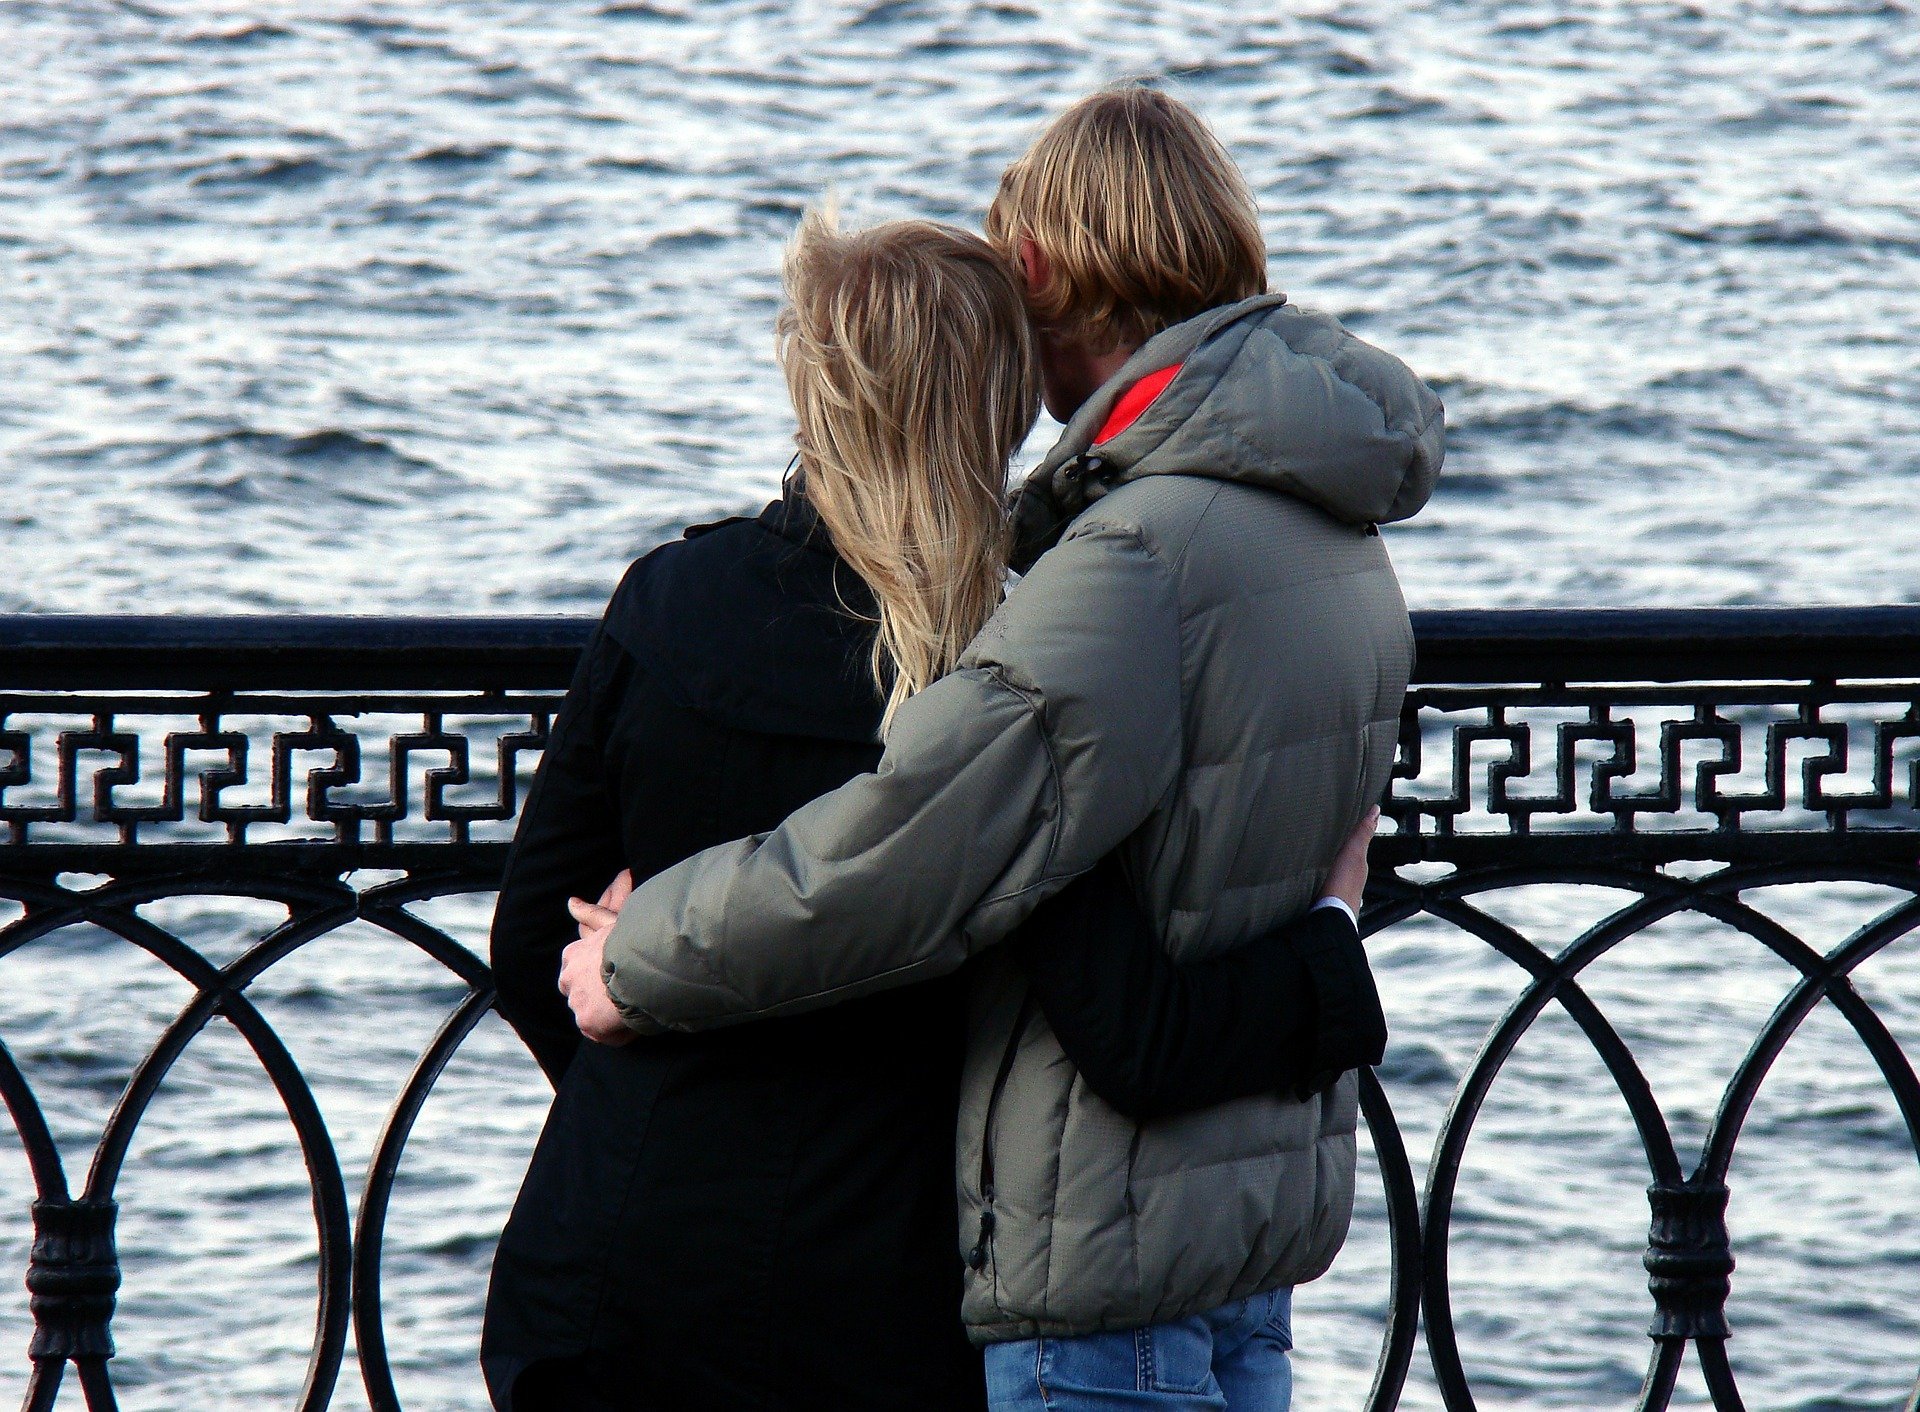 Man and woman hugging each other and looking at the sea.